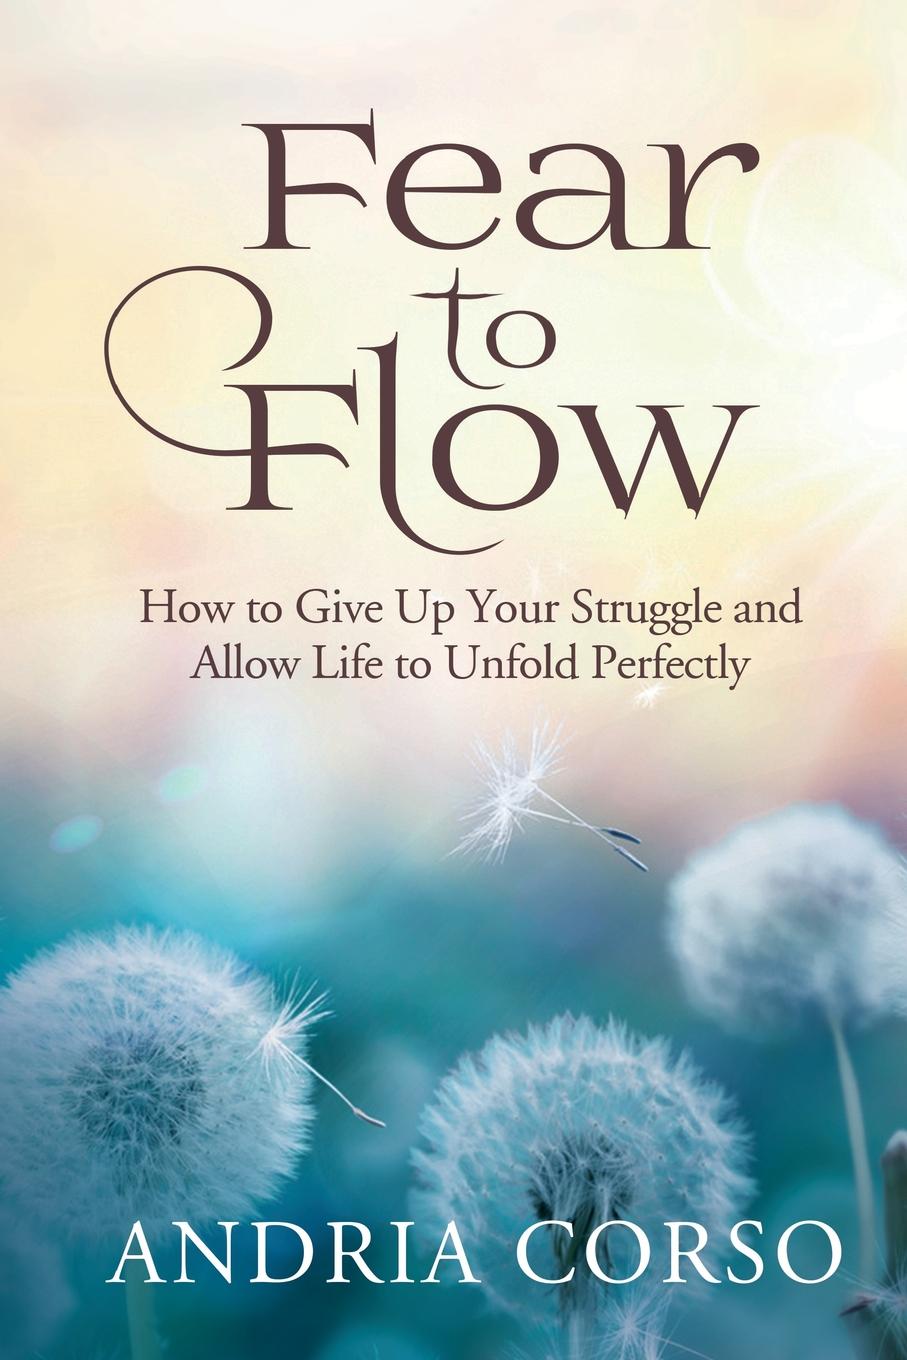 Flow book. Flow book year. Life allow